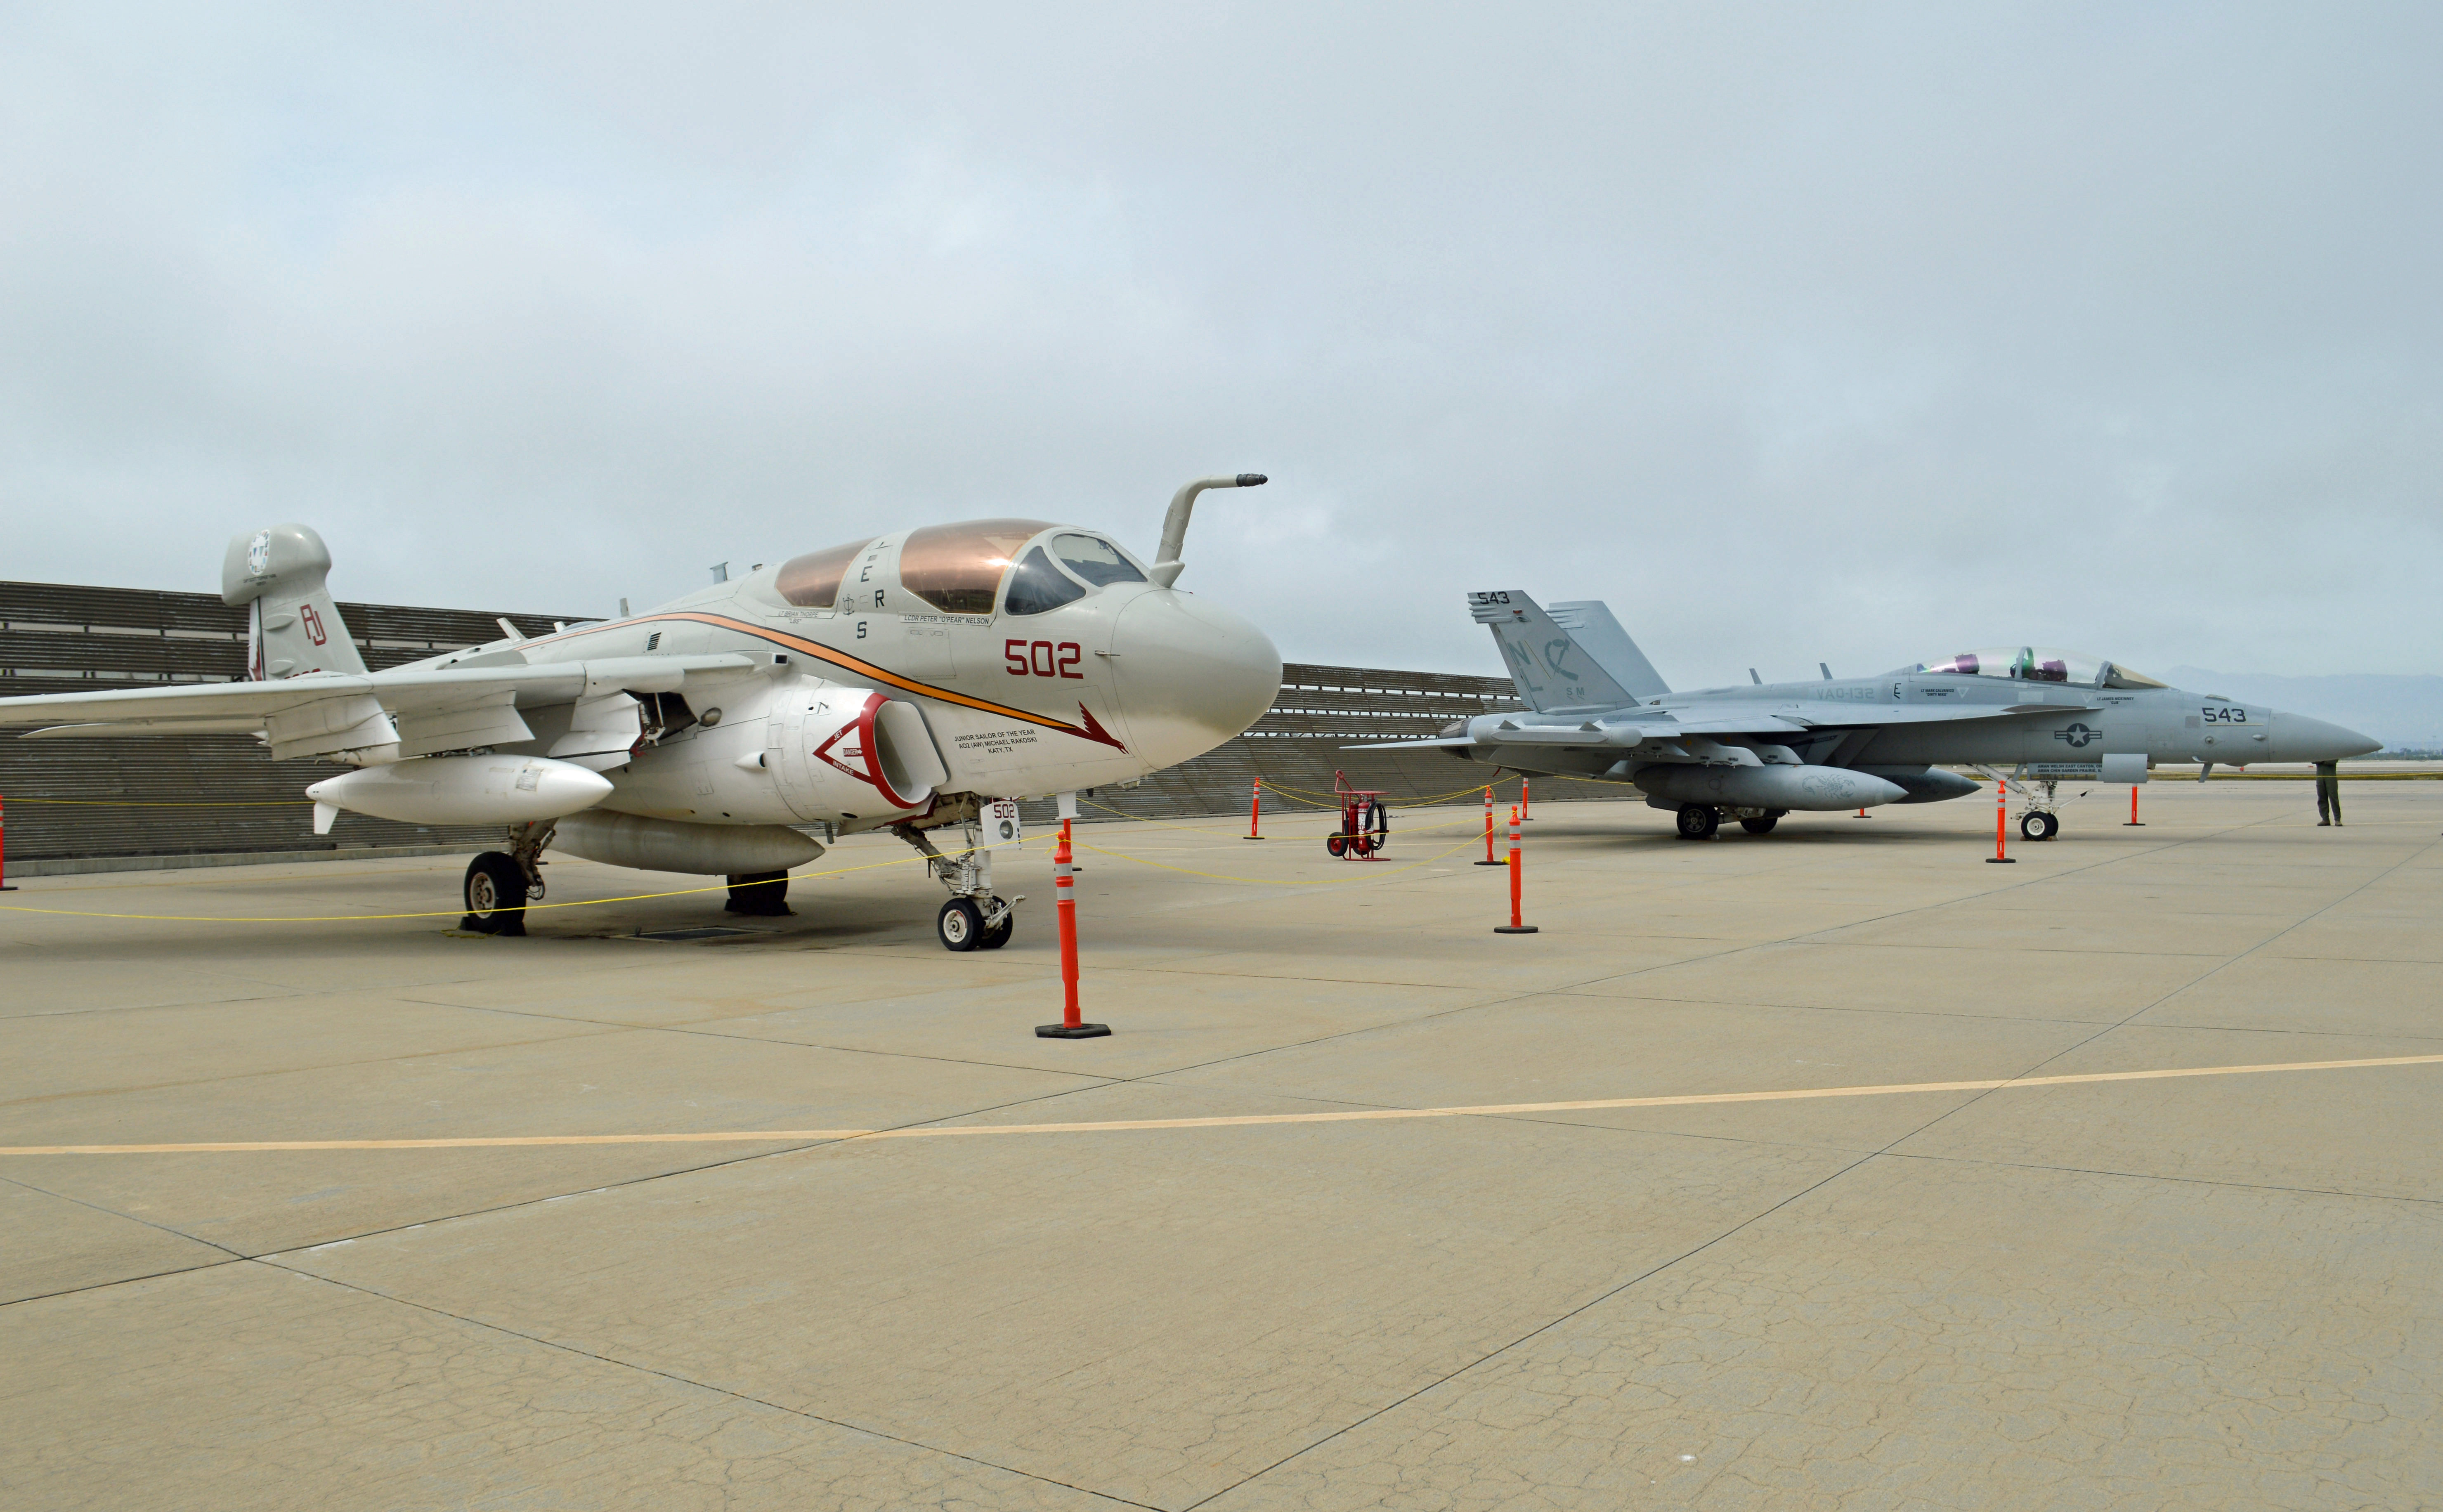 The last U.S. Navy EA-6B Prowler, front, and a U.S. Navy EA-18G Growler were on display representing past and present electronic warfare aircraft platforms at the 45th Annual Collaborative EW Symposium at Naval Base Ventura County, Point Mugu, California, on April 6. The symposium, jointly hosted by Naval Air Warfare Center Weapons Division and the Association of Old Crows, ran April 5-7. Photo courtesy of U.S. Navy.